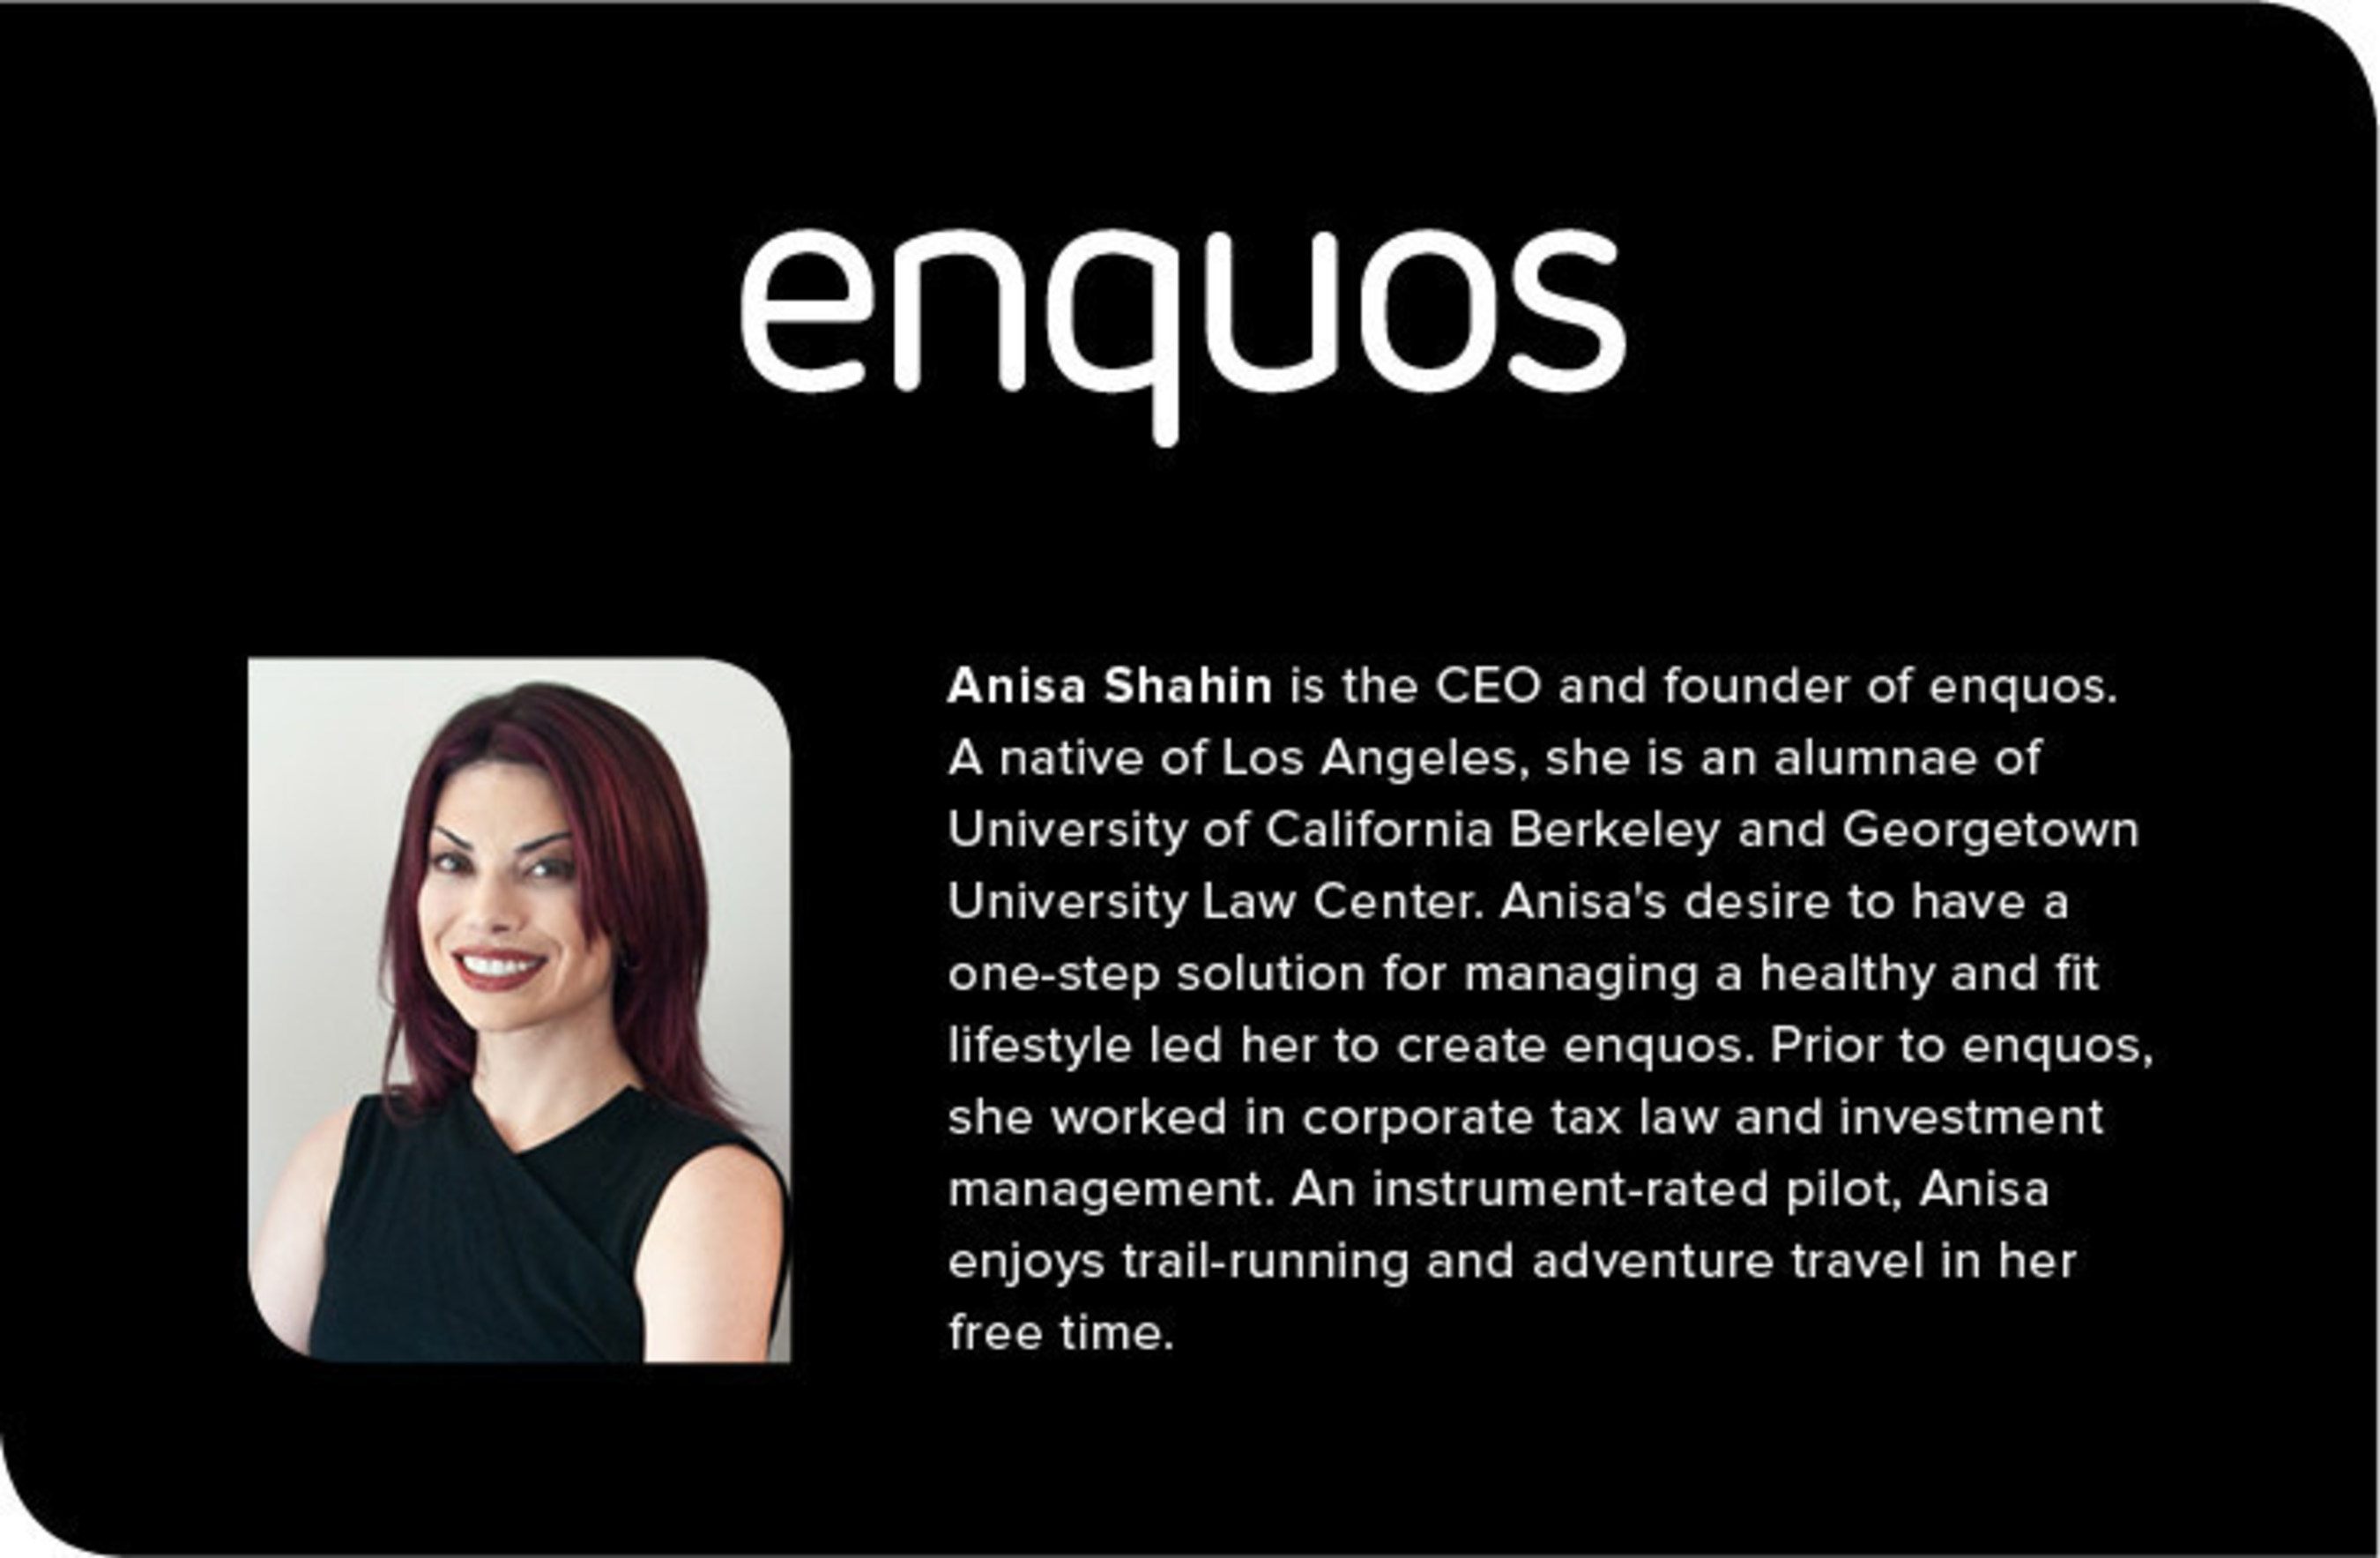 Anisa Shahin, CEO and founder of enquos